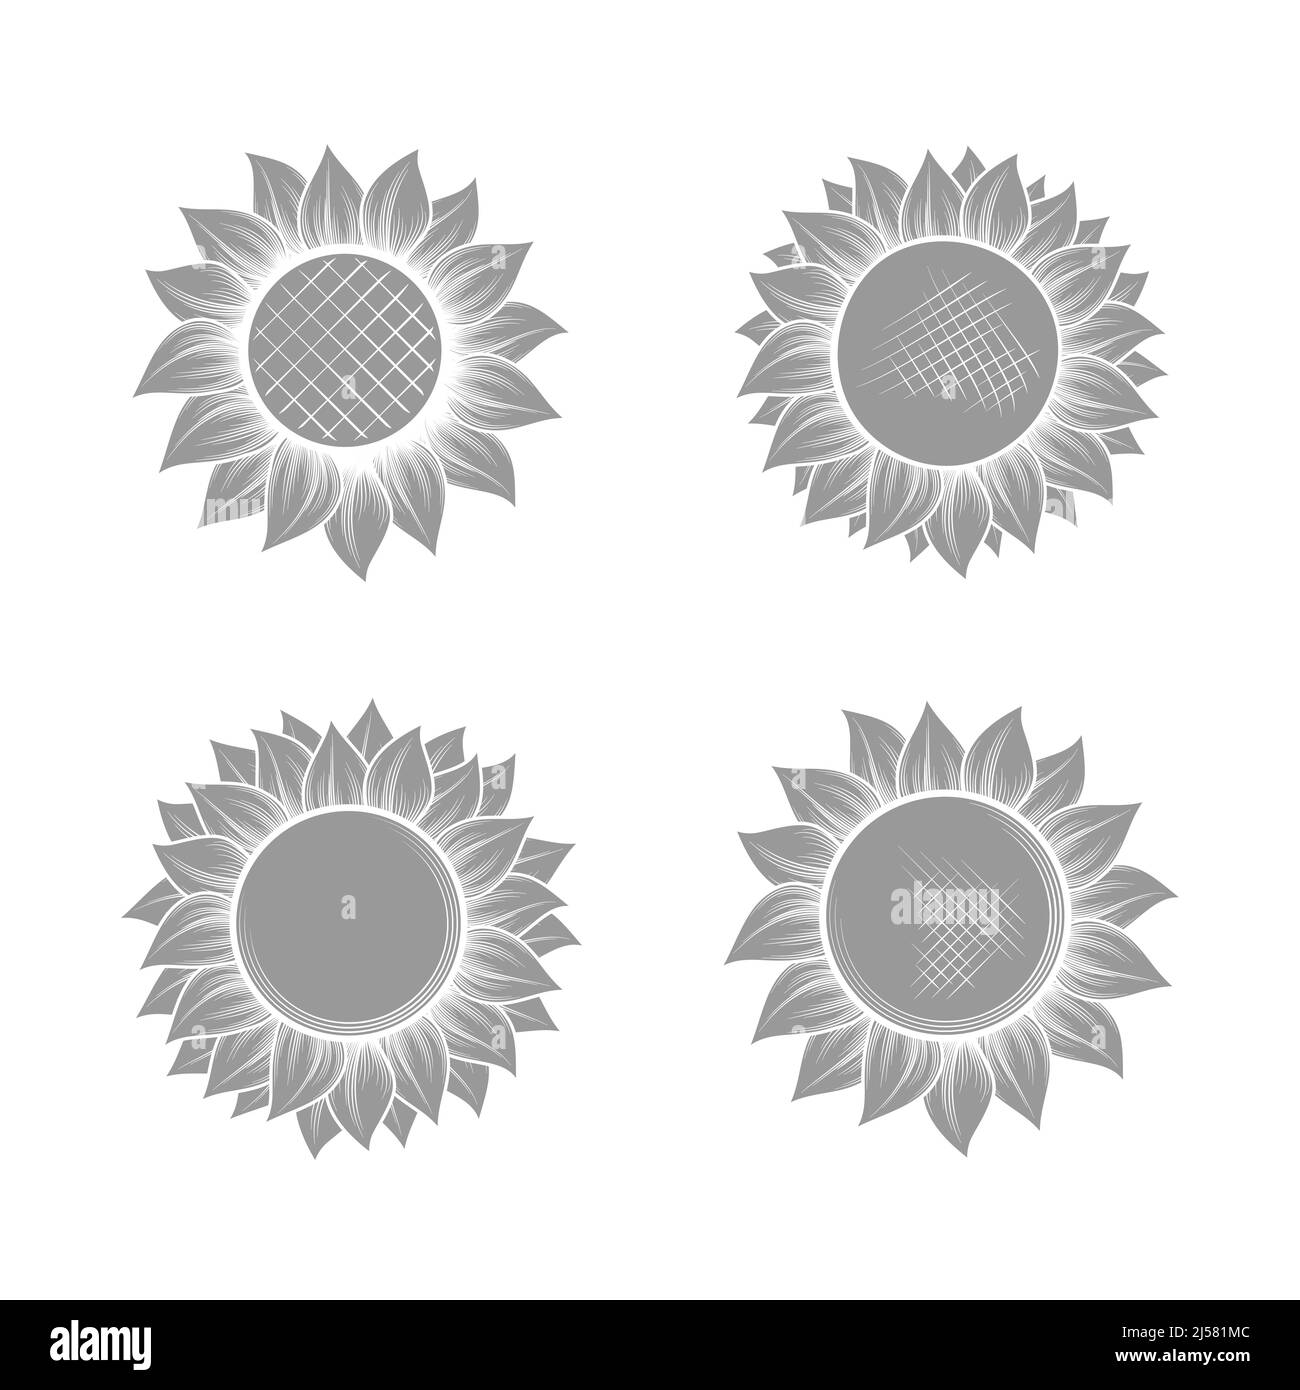 Grey sunflowers silhouettes set Stock Vector